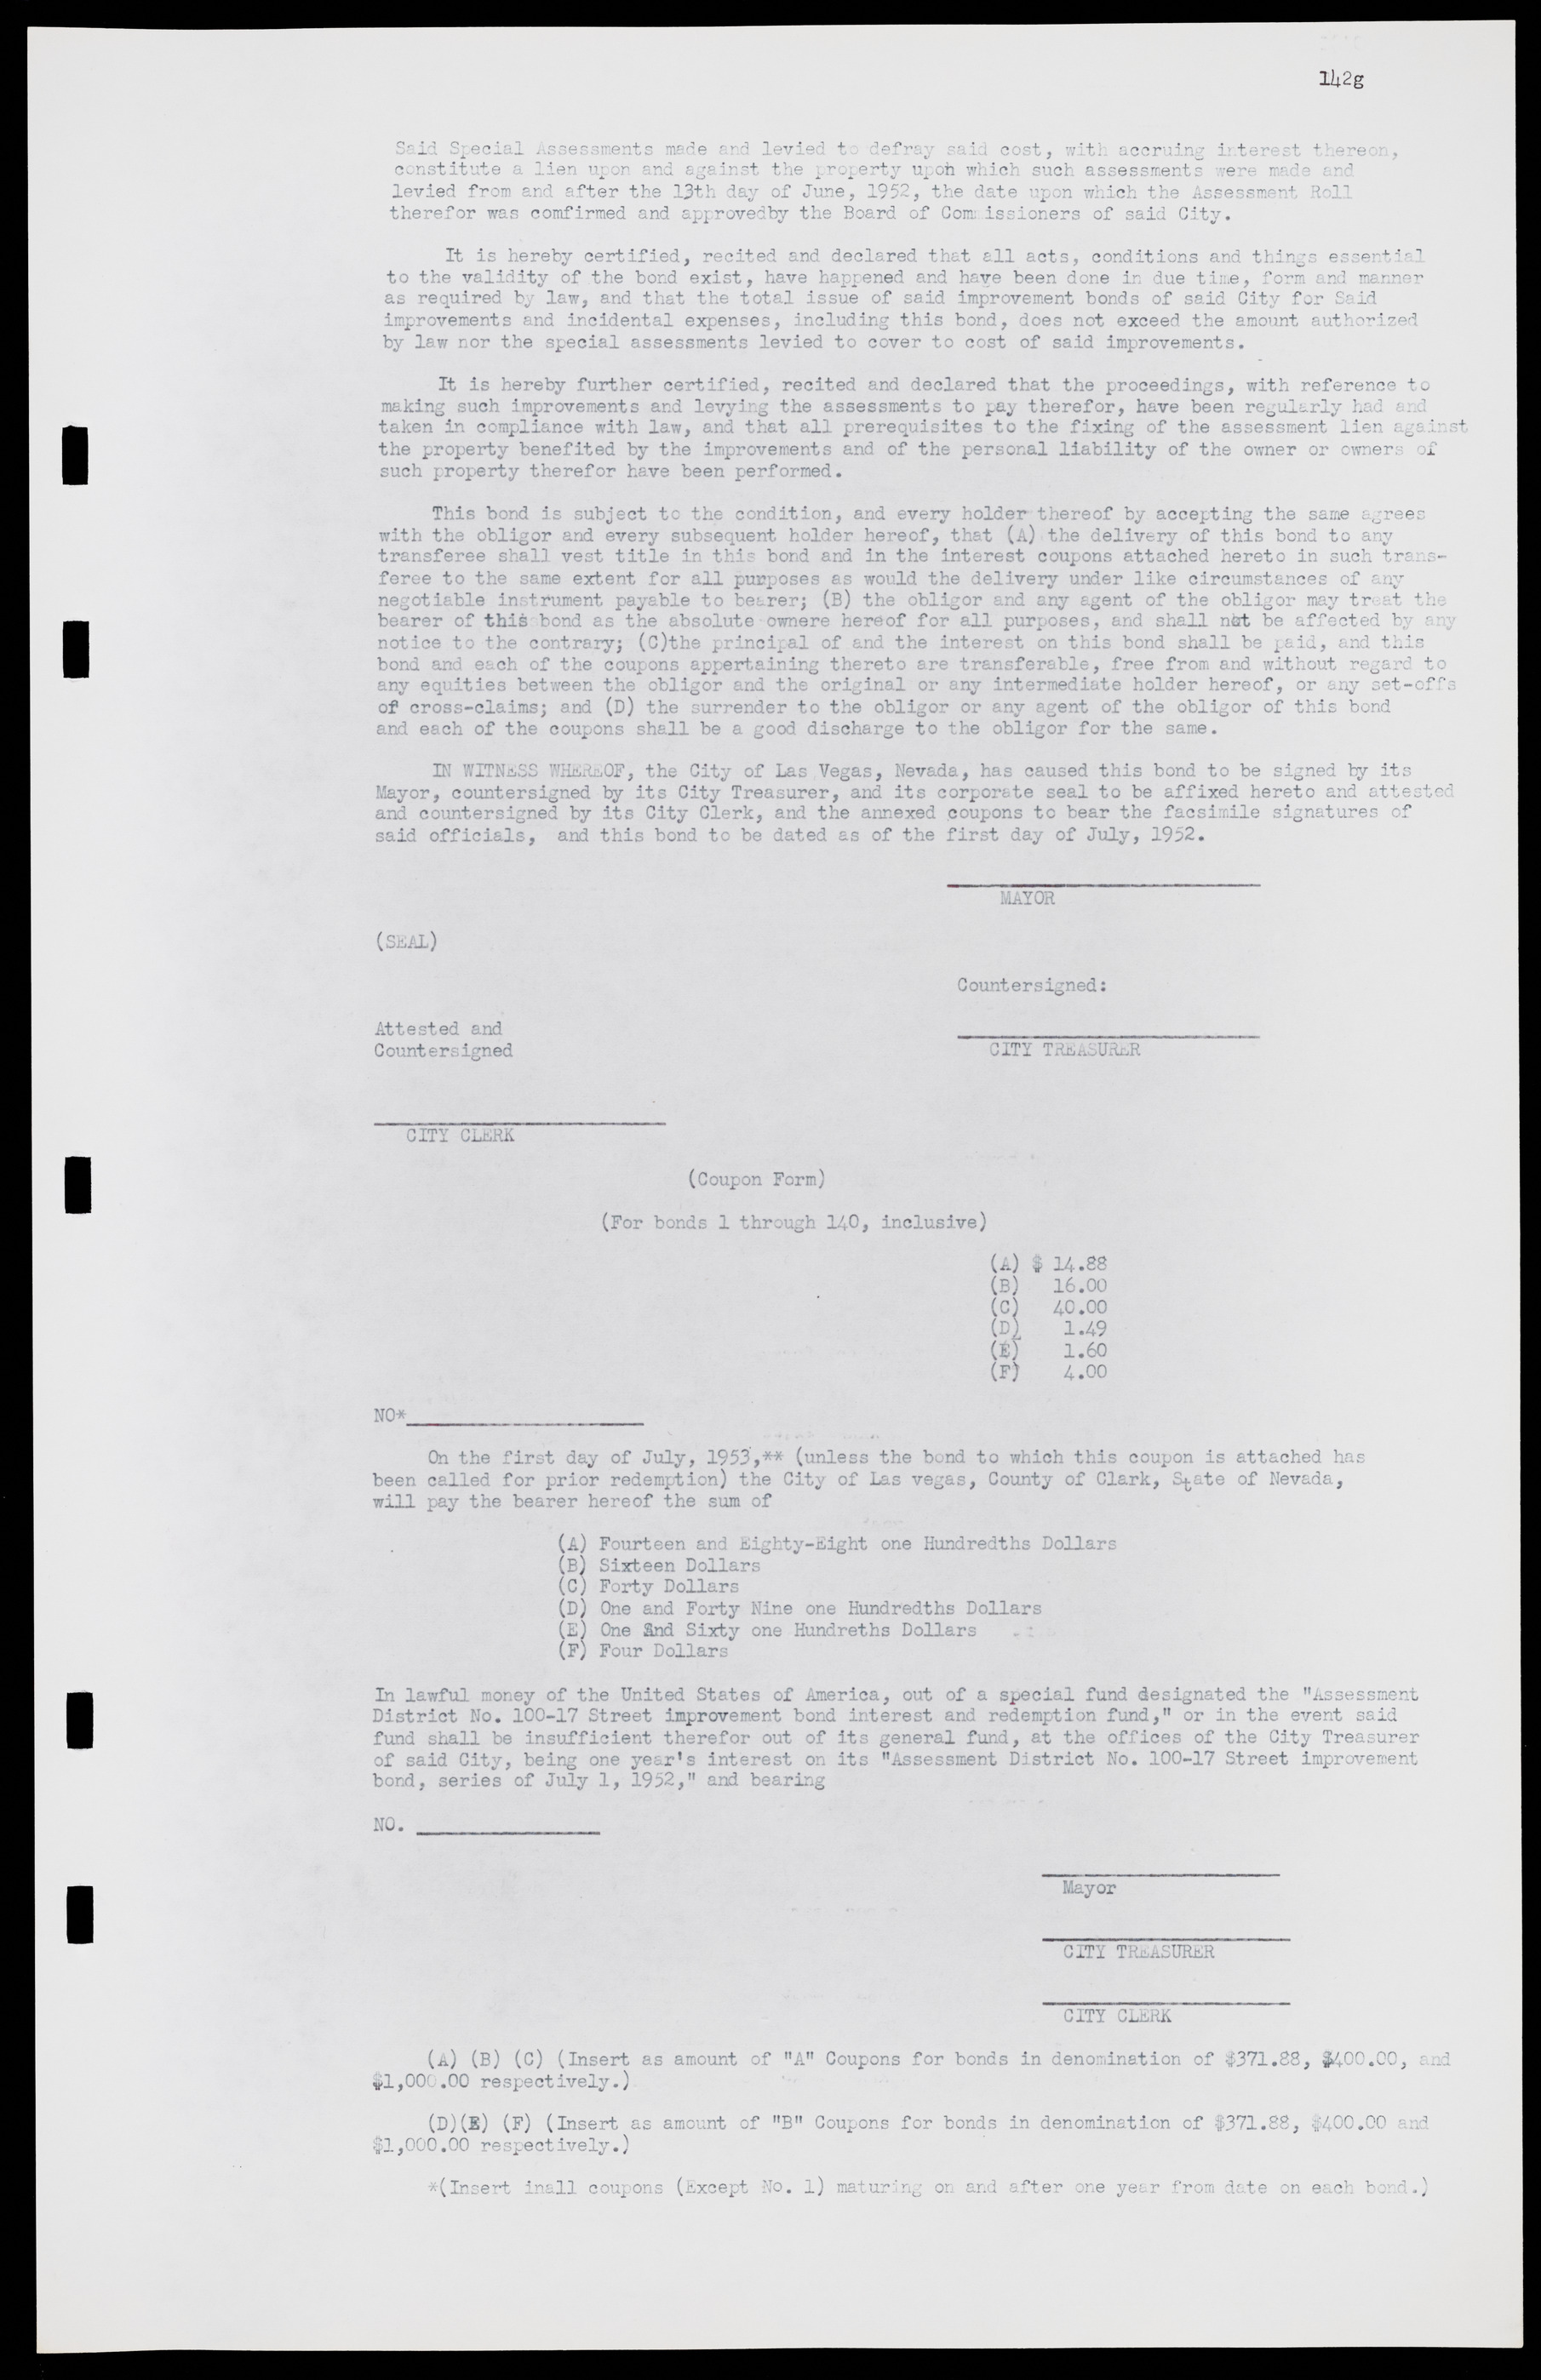 Las Vegas City Commission Minutes, May 26, 1952 to February 17, 1954, lvc000008-155